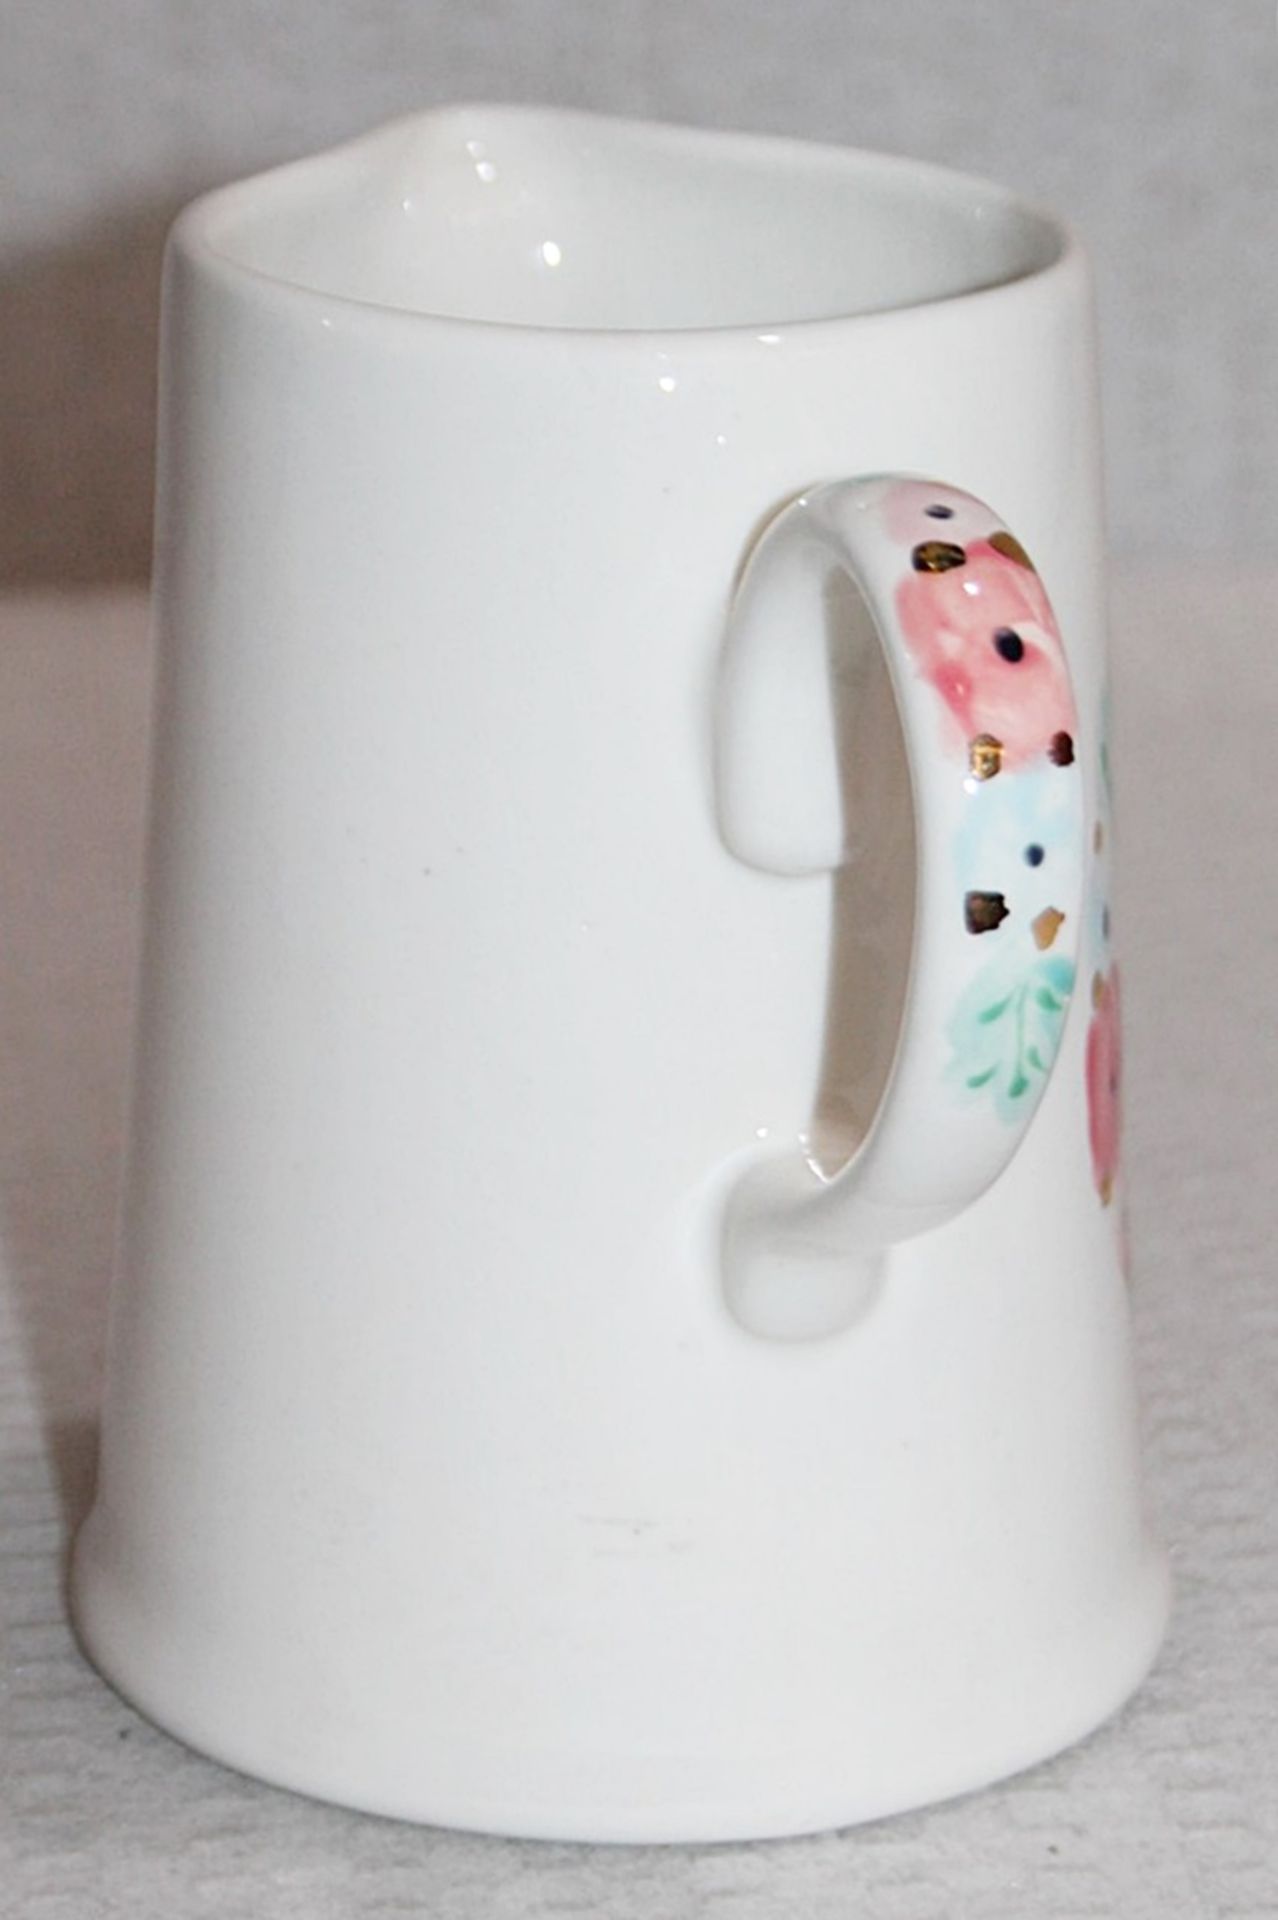 1 x Ceramic Handpainted Jug With Gilded Edging - Ex-Display Item From A London Department Store - - Image 3 of 7